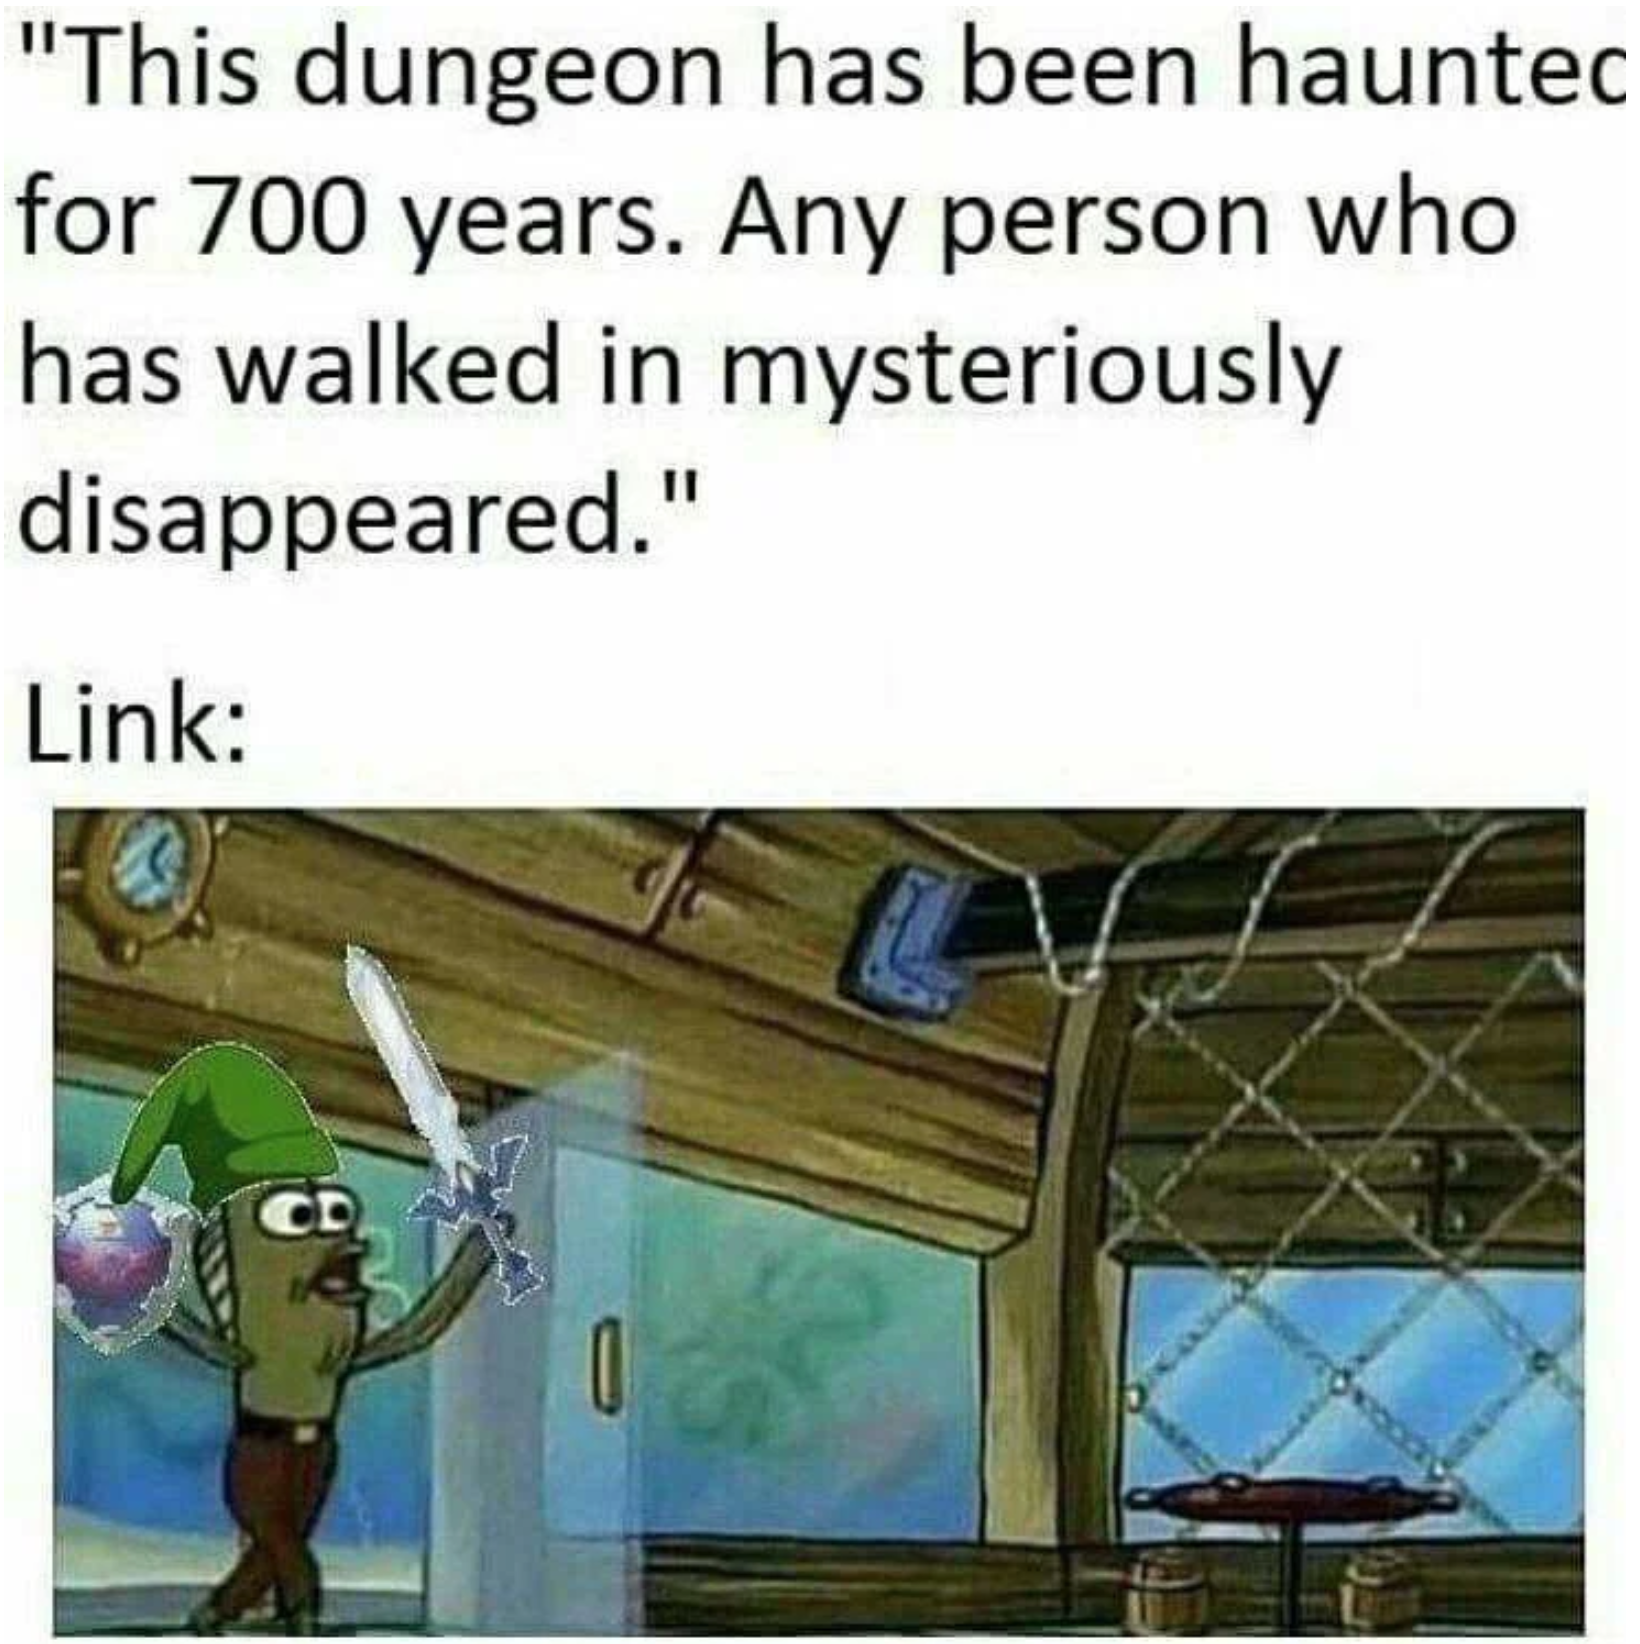 dank spongebob memes - "This dungeon has been haunted for 700 years. Any person who has walked in mysteriously disappeared." Link 0